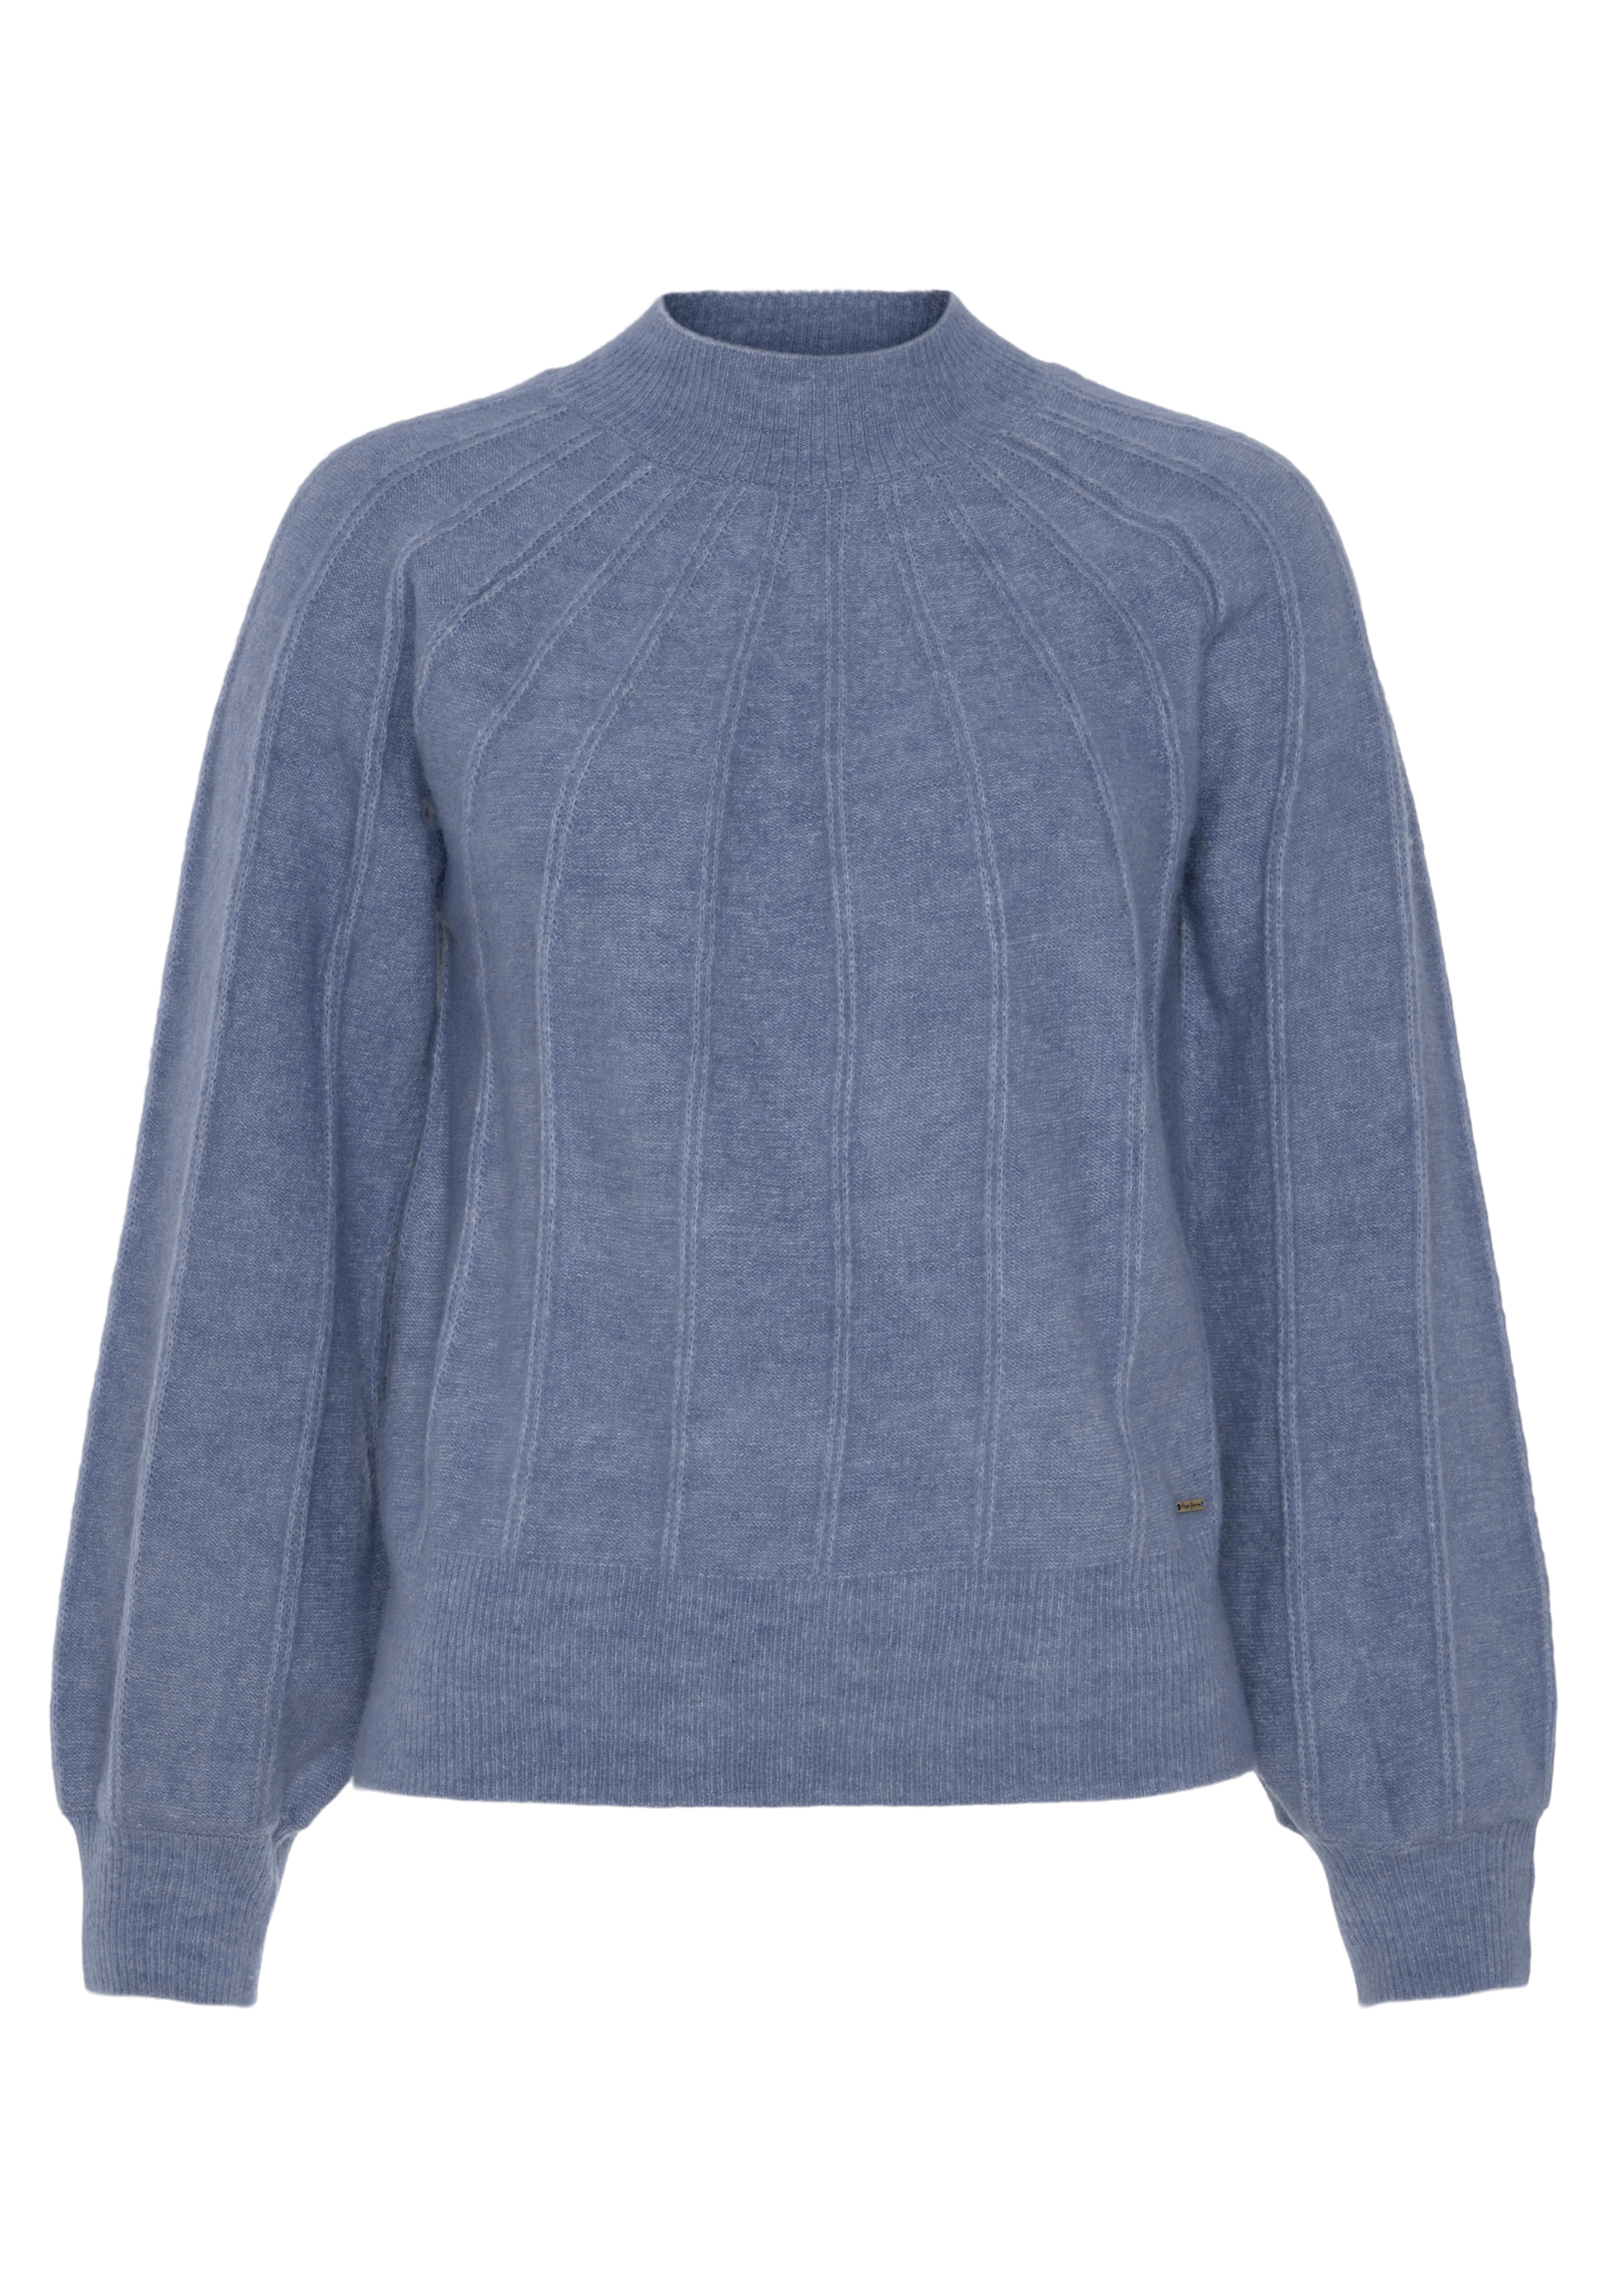 Pepe Jeans Strickpullover »KENDALL RO«-Pepe Jeans 1